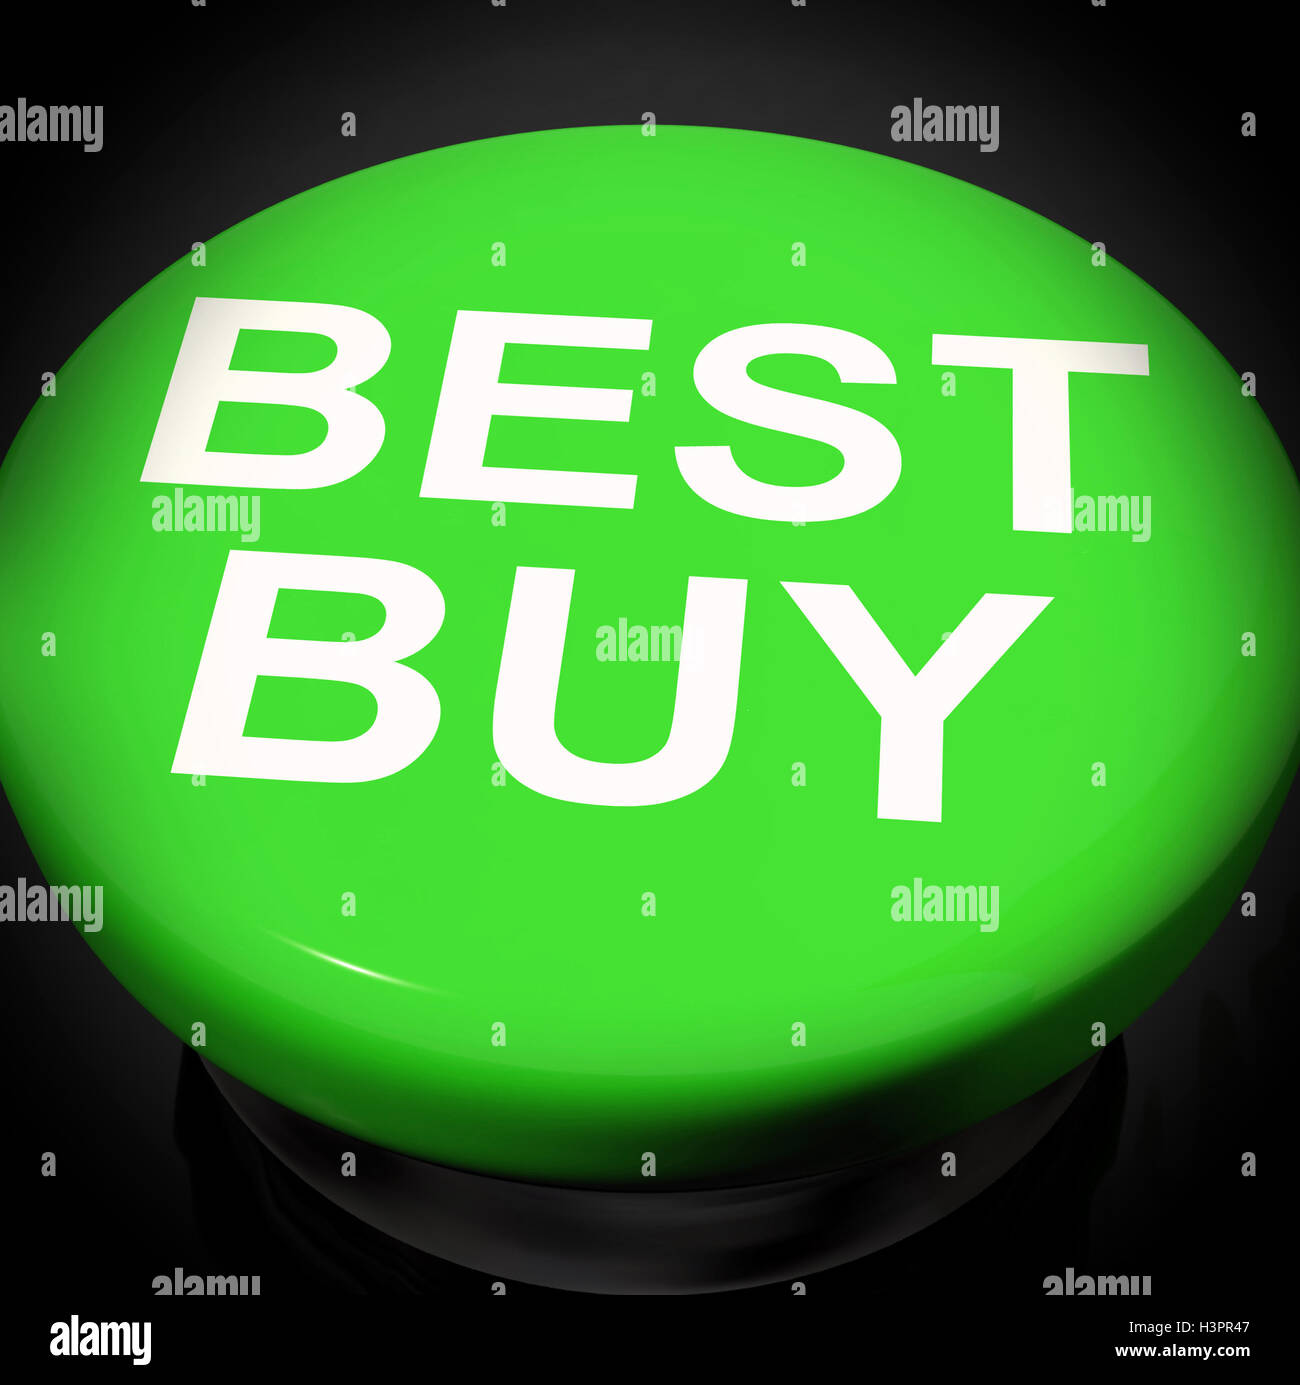 Best Buy Switch Shows Promotion Offer Or Discount Stock Photo